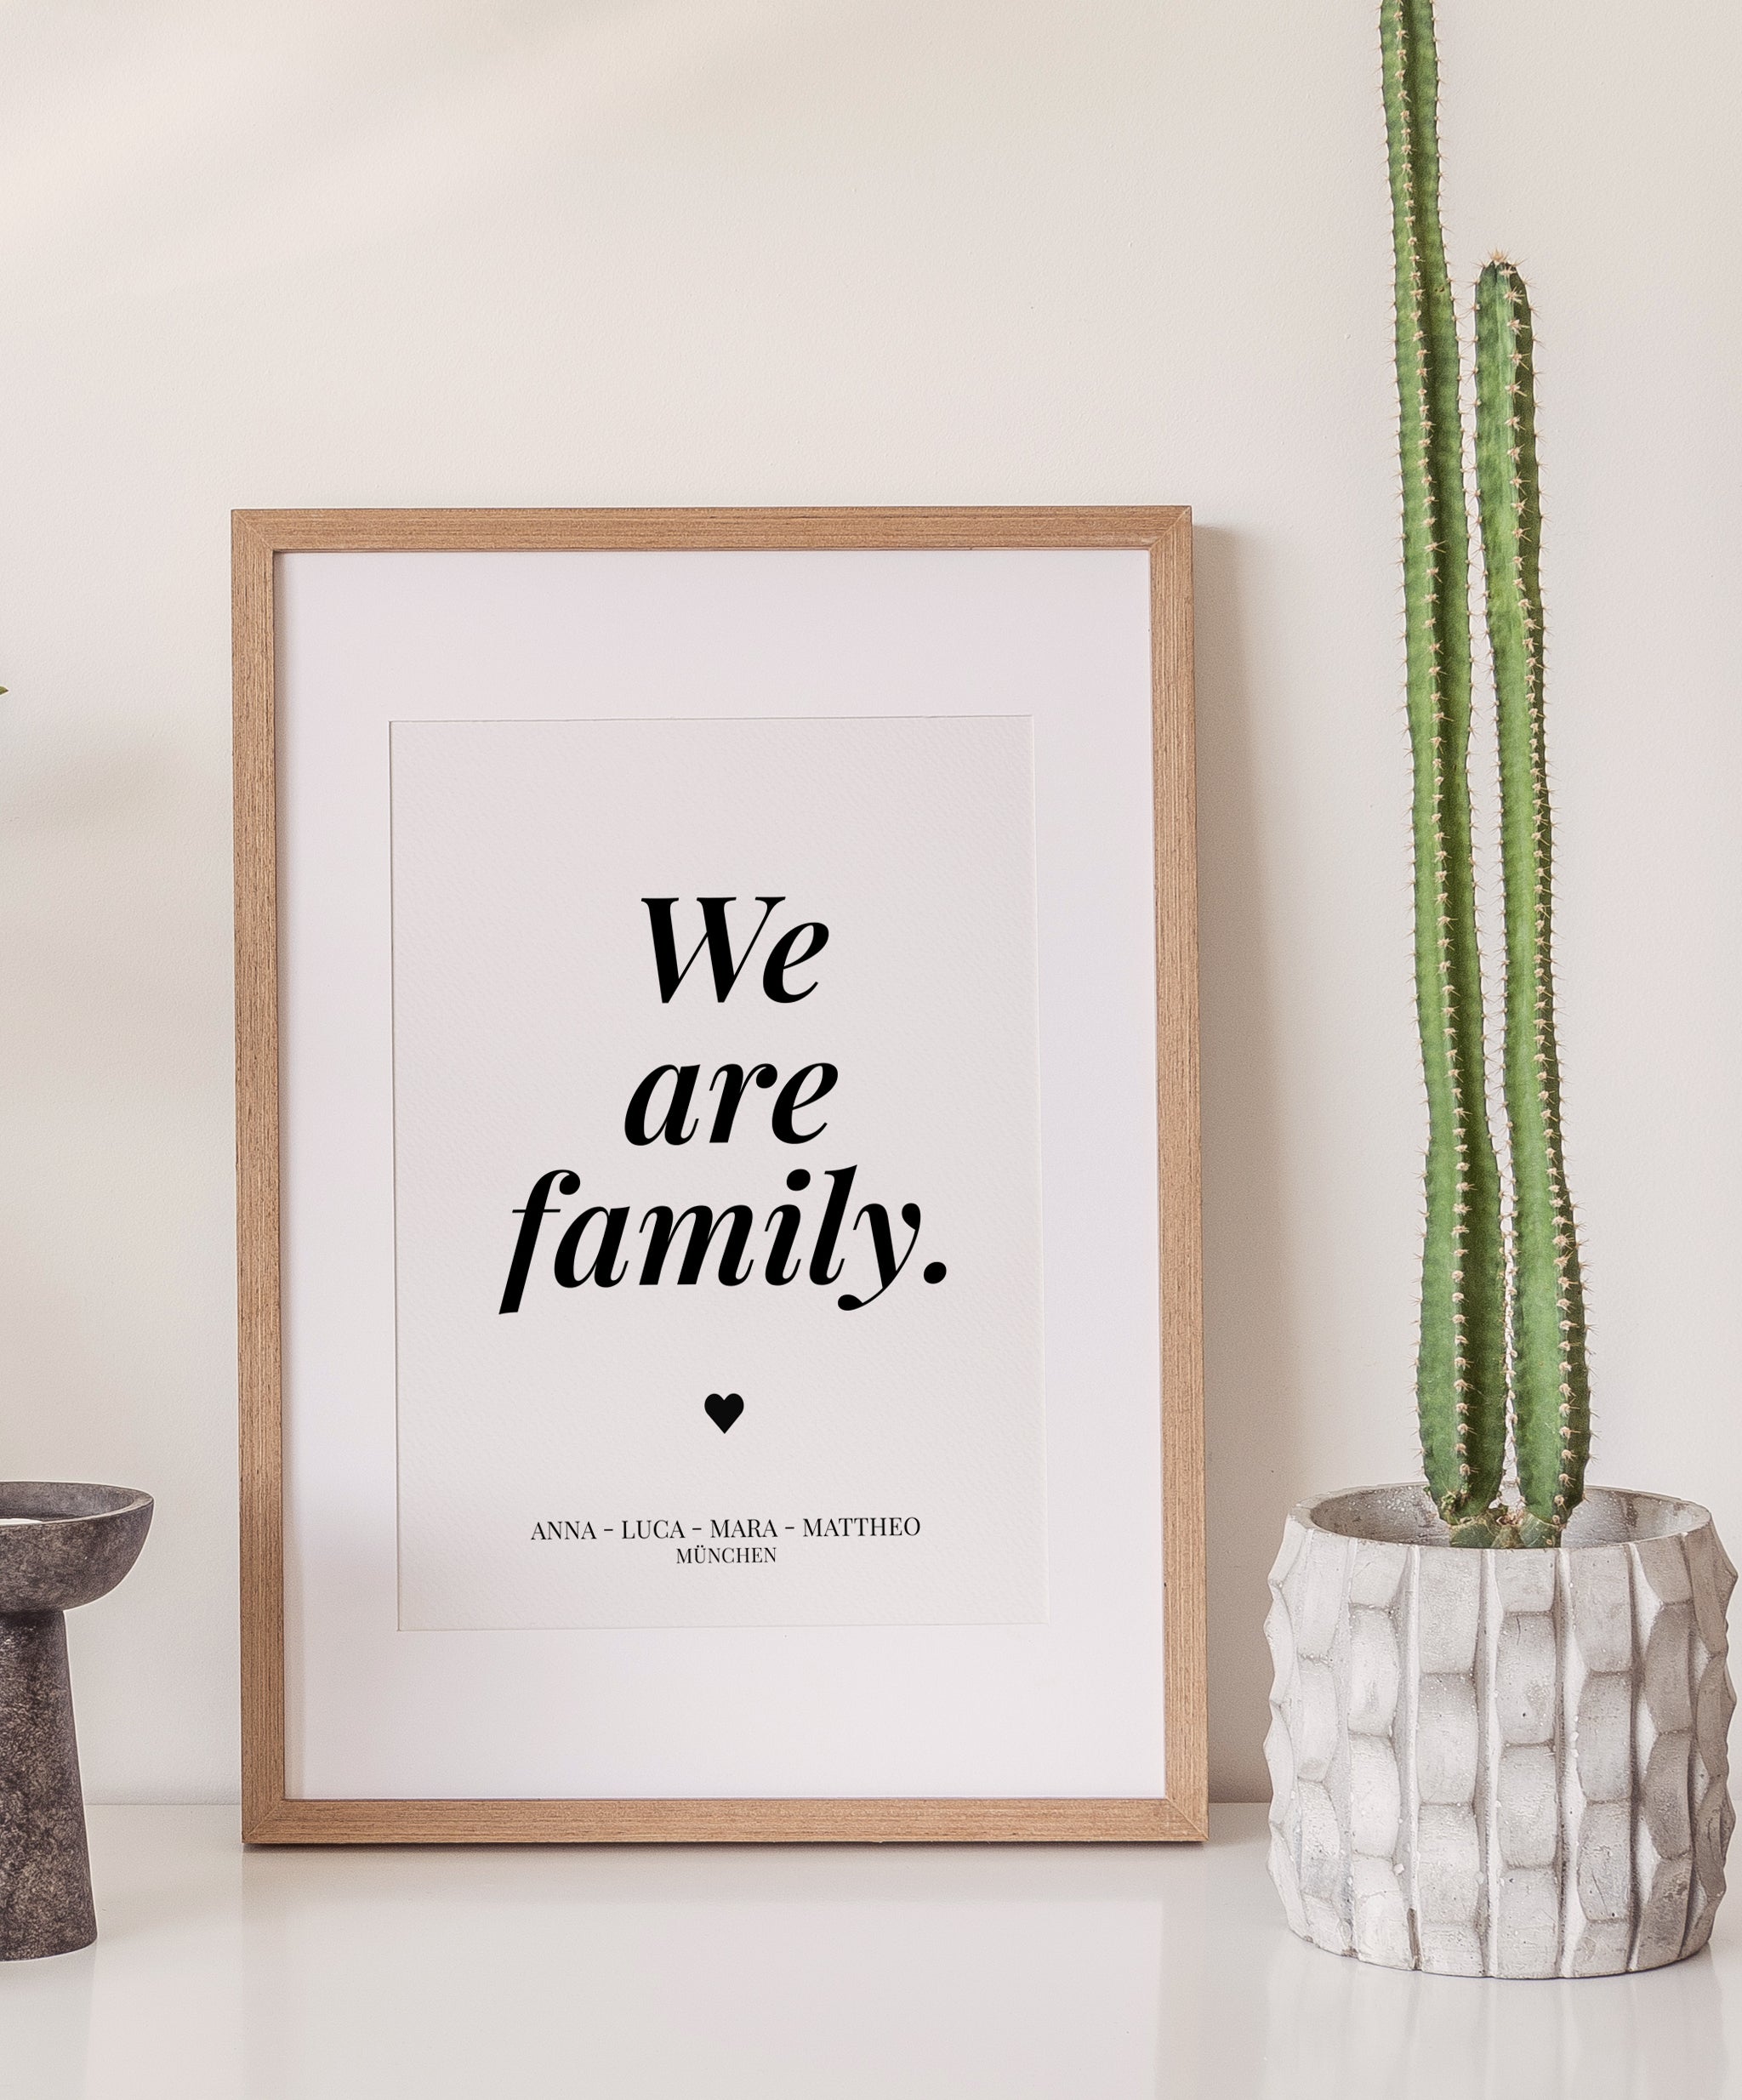 We are family - Poster - No. 2